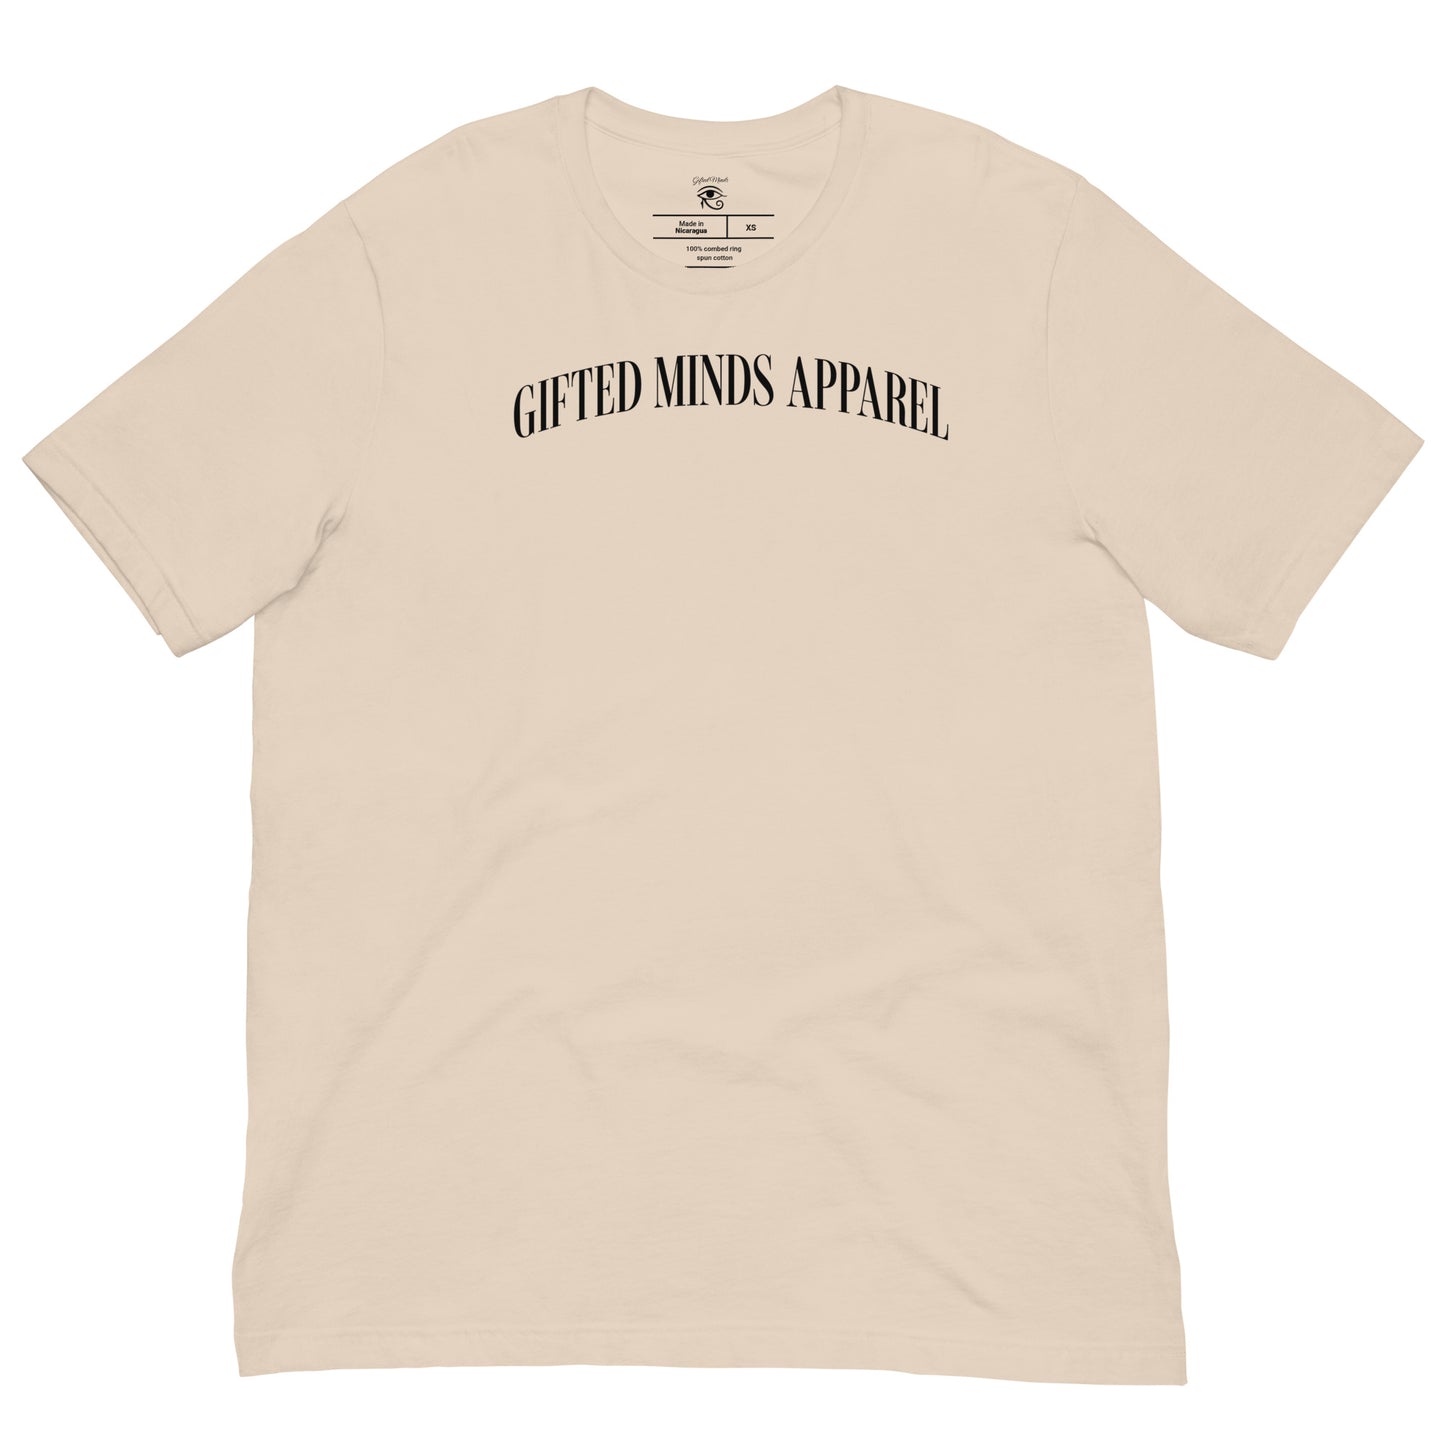 Gifted Minds Apparel Arched T-shirt - GFTD MNDS